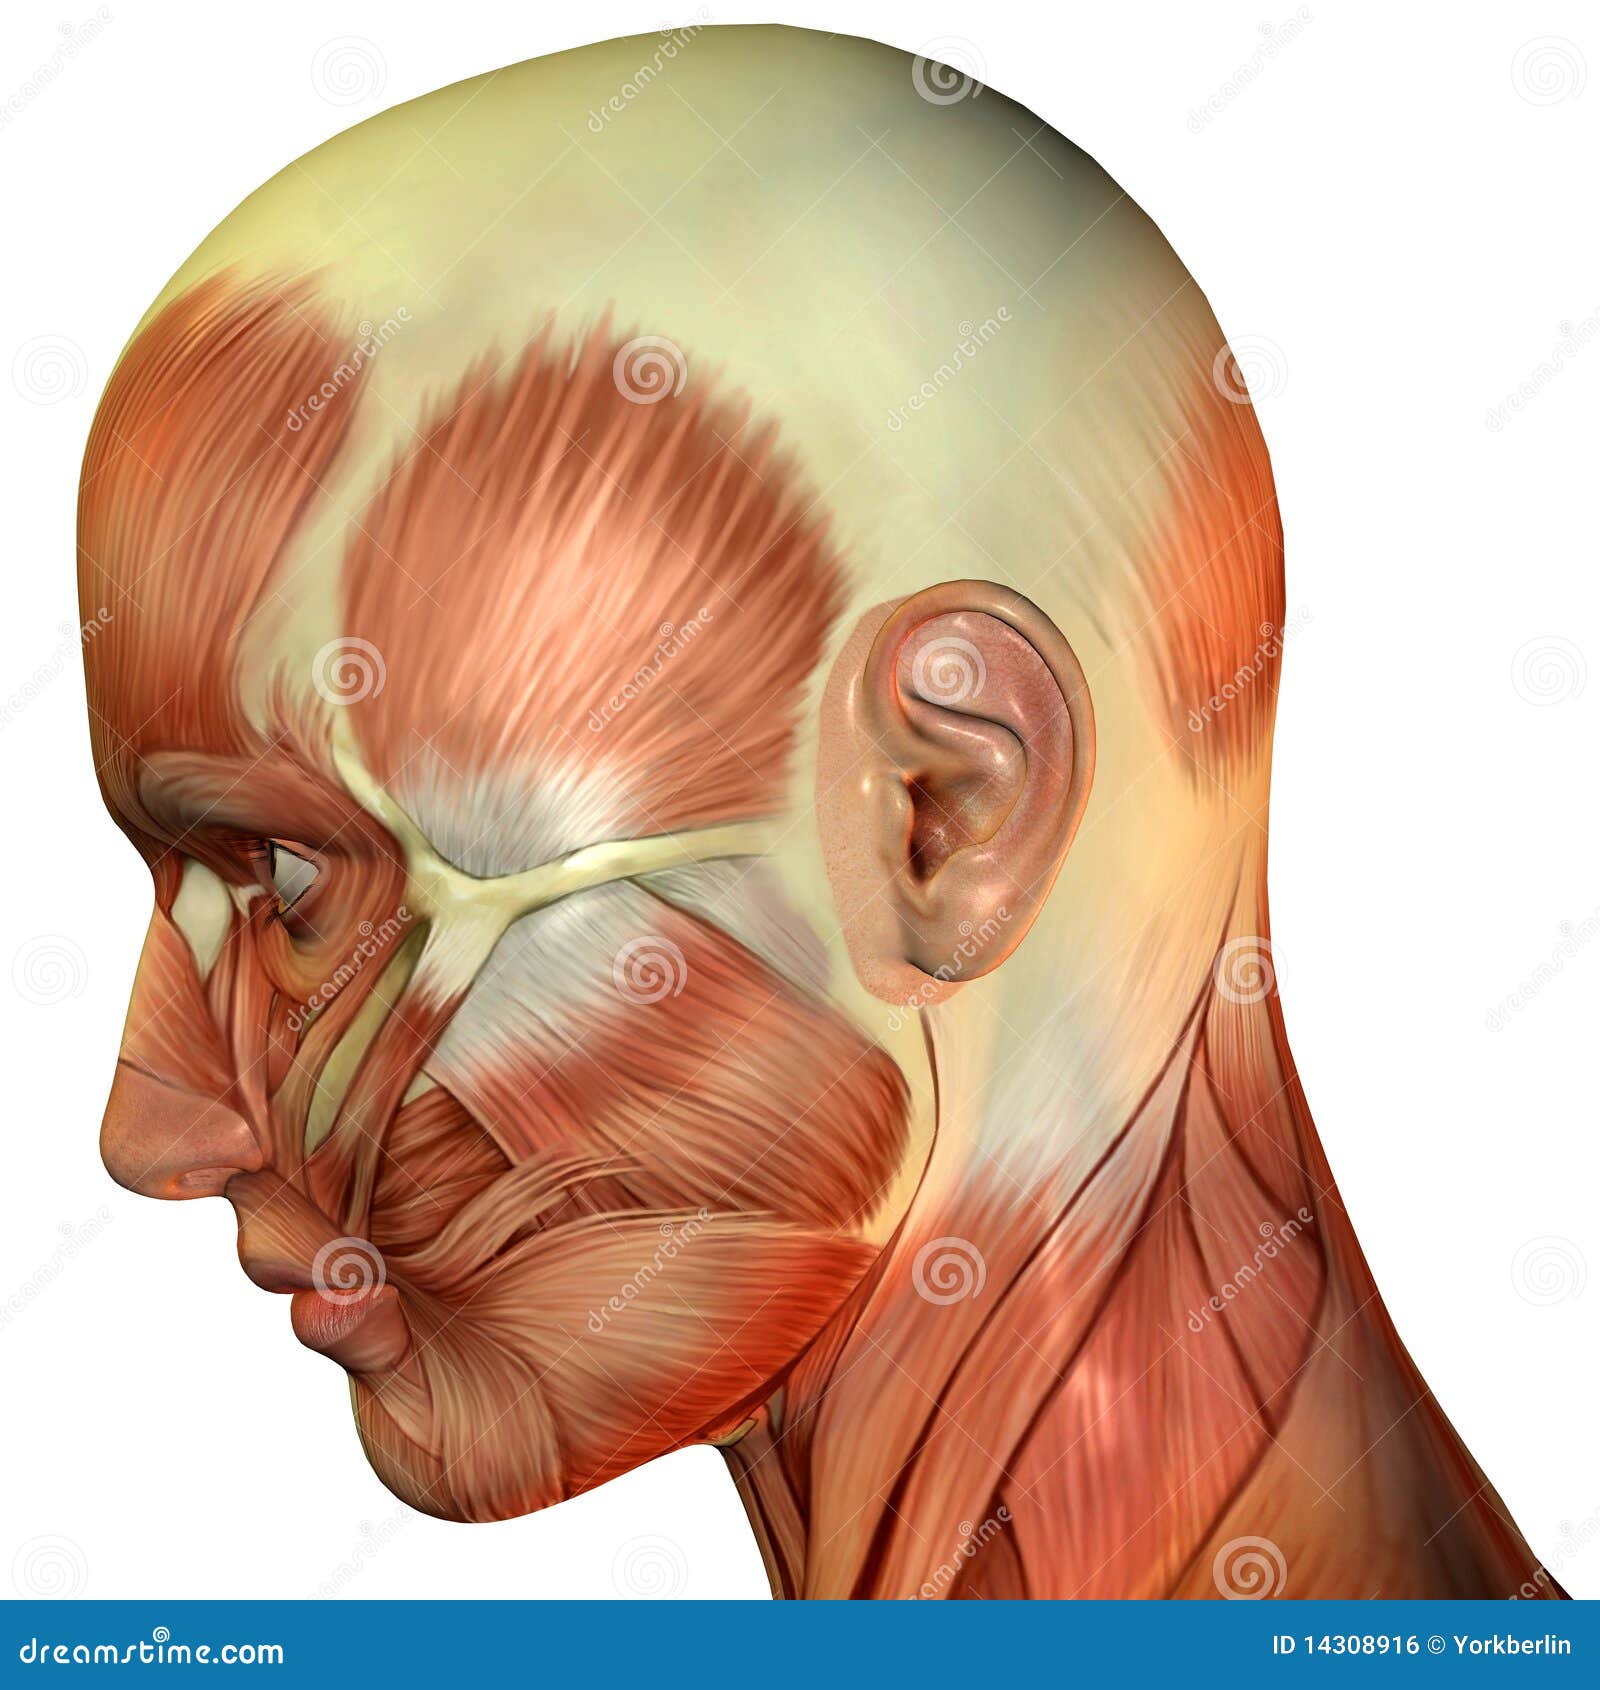 face pdf draw how human to download Head Side Illustration View Of Fibers Stock Muscle